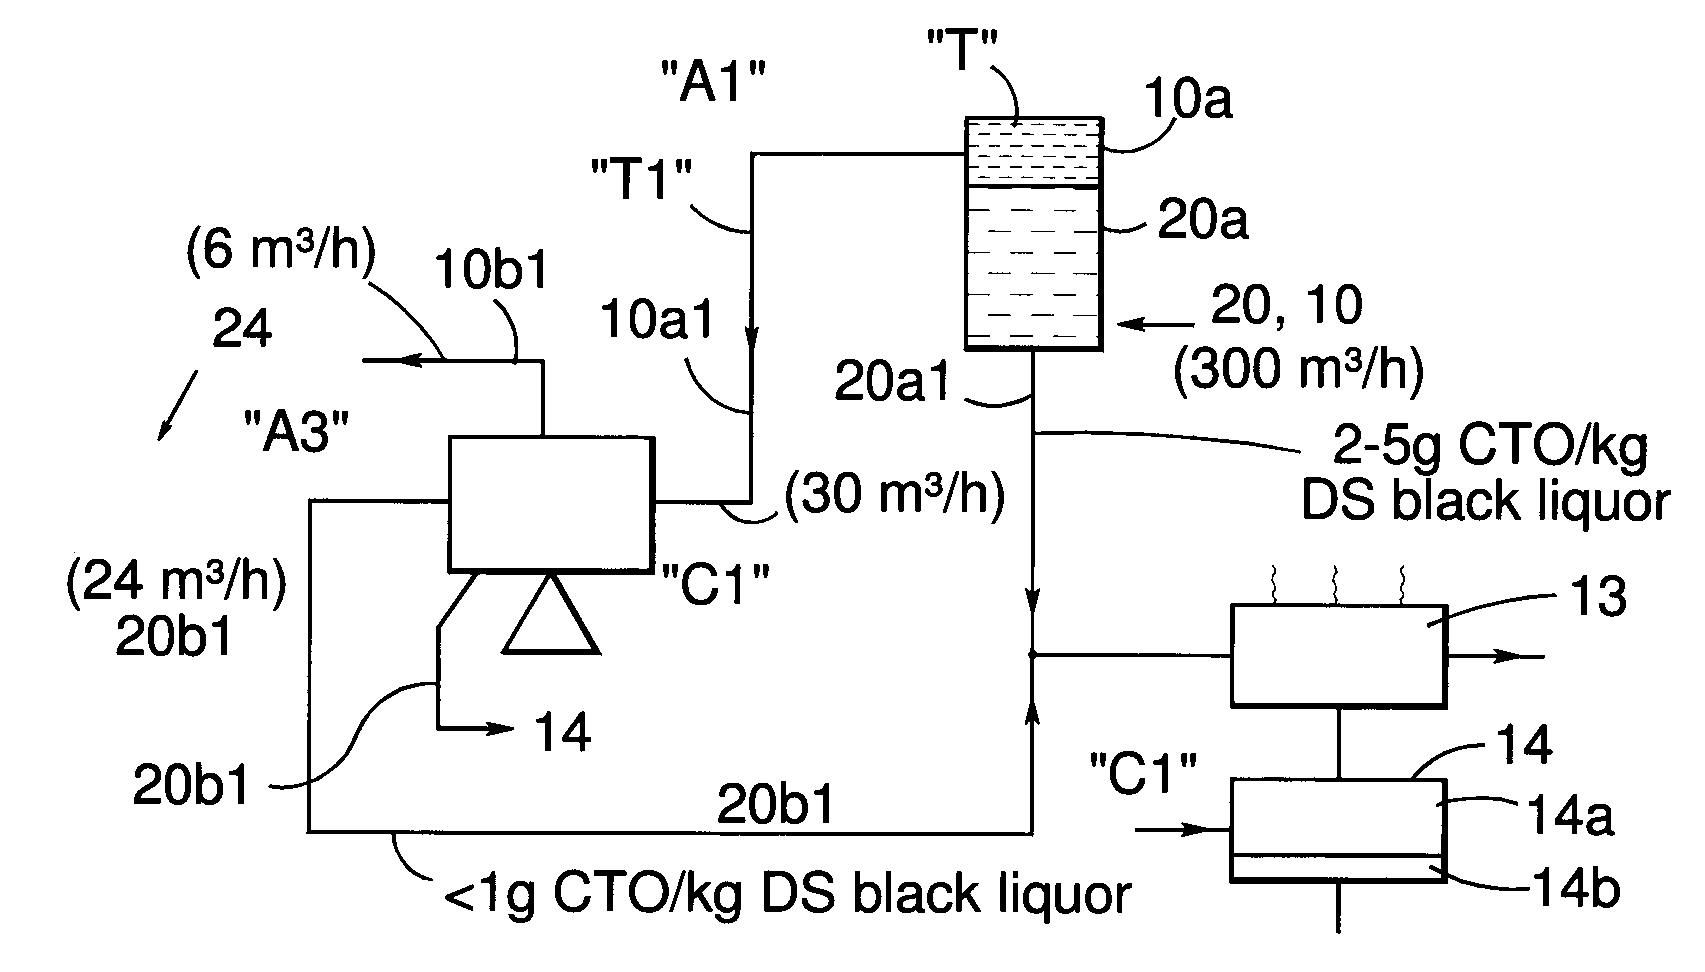 Method Of Separating, From A Mixture Of Black Liquor And Tall Oil Soap Product, Concentrated Portions Of Tall Oil Soap Product And Arrangements For Said Concentrated Tall Oil Soap Product And/Or Separated Black Liquor